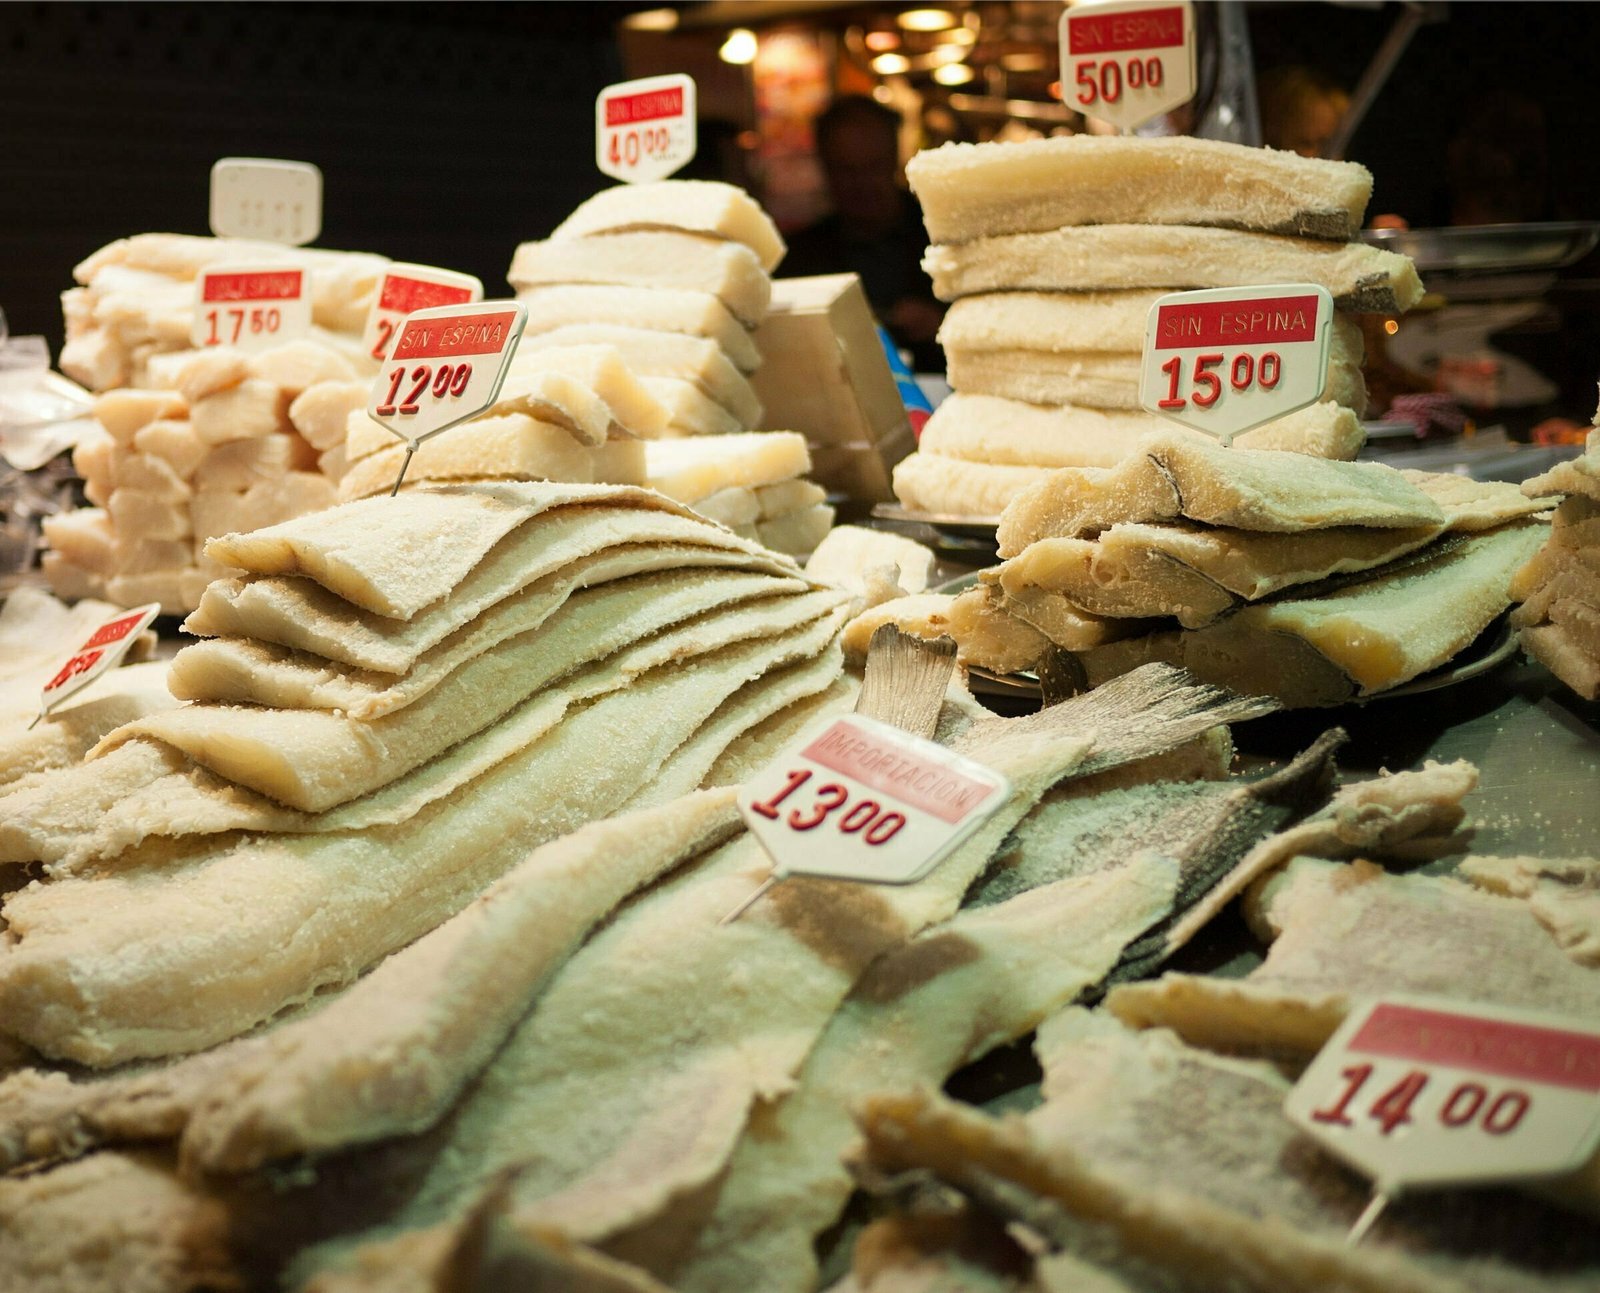 Fillets of dried bacalao are laid out for sale at a night market